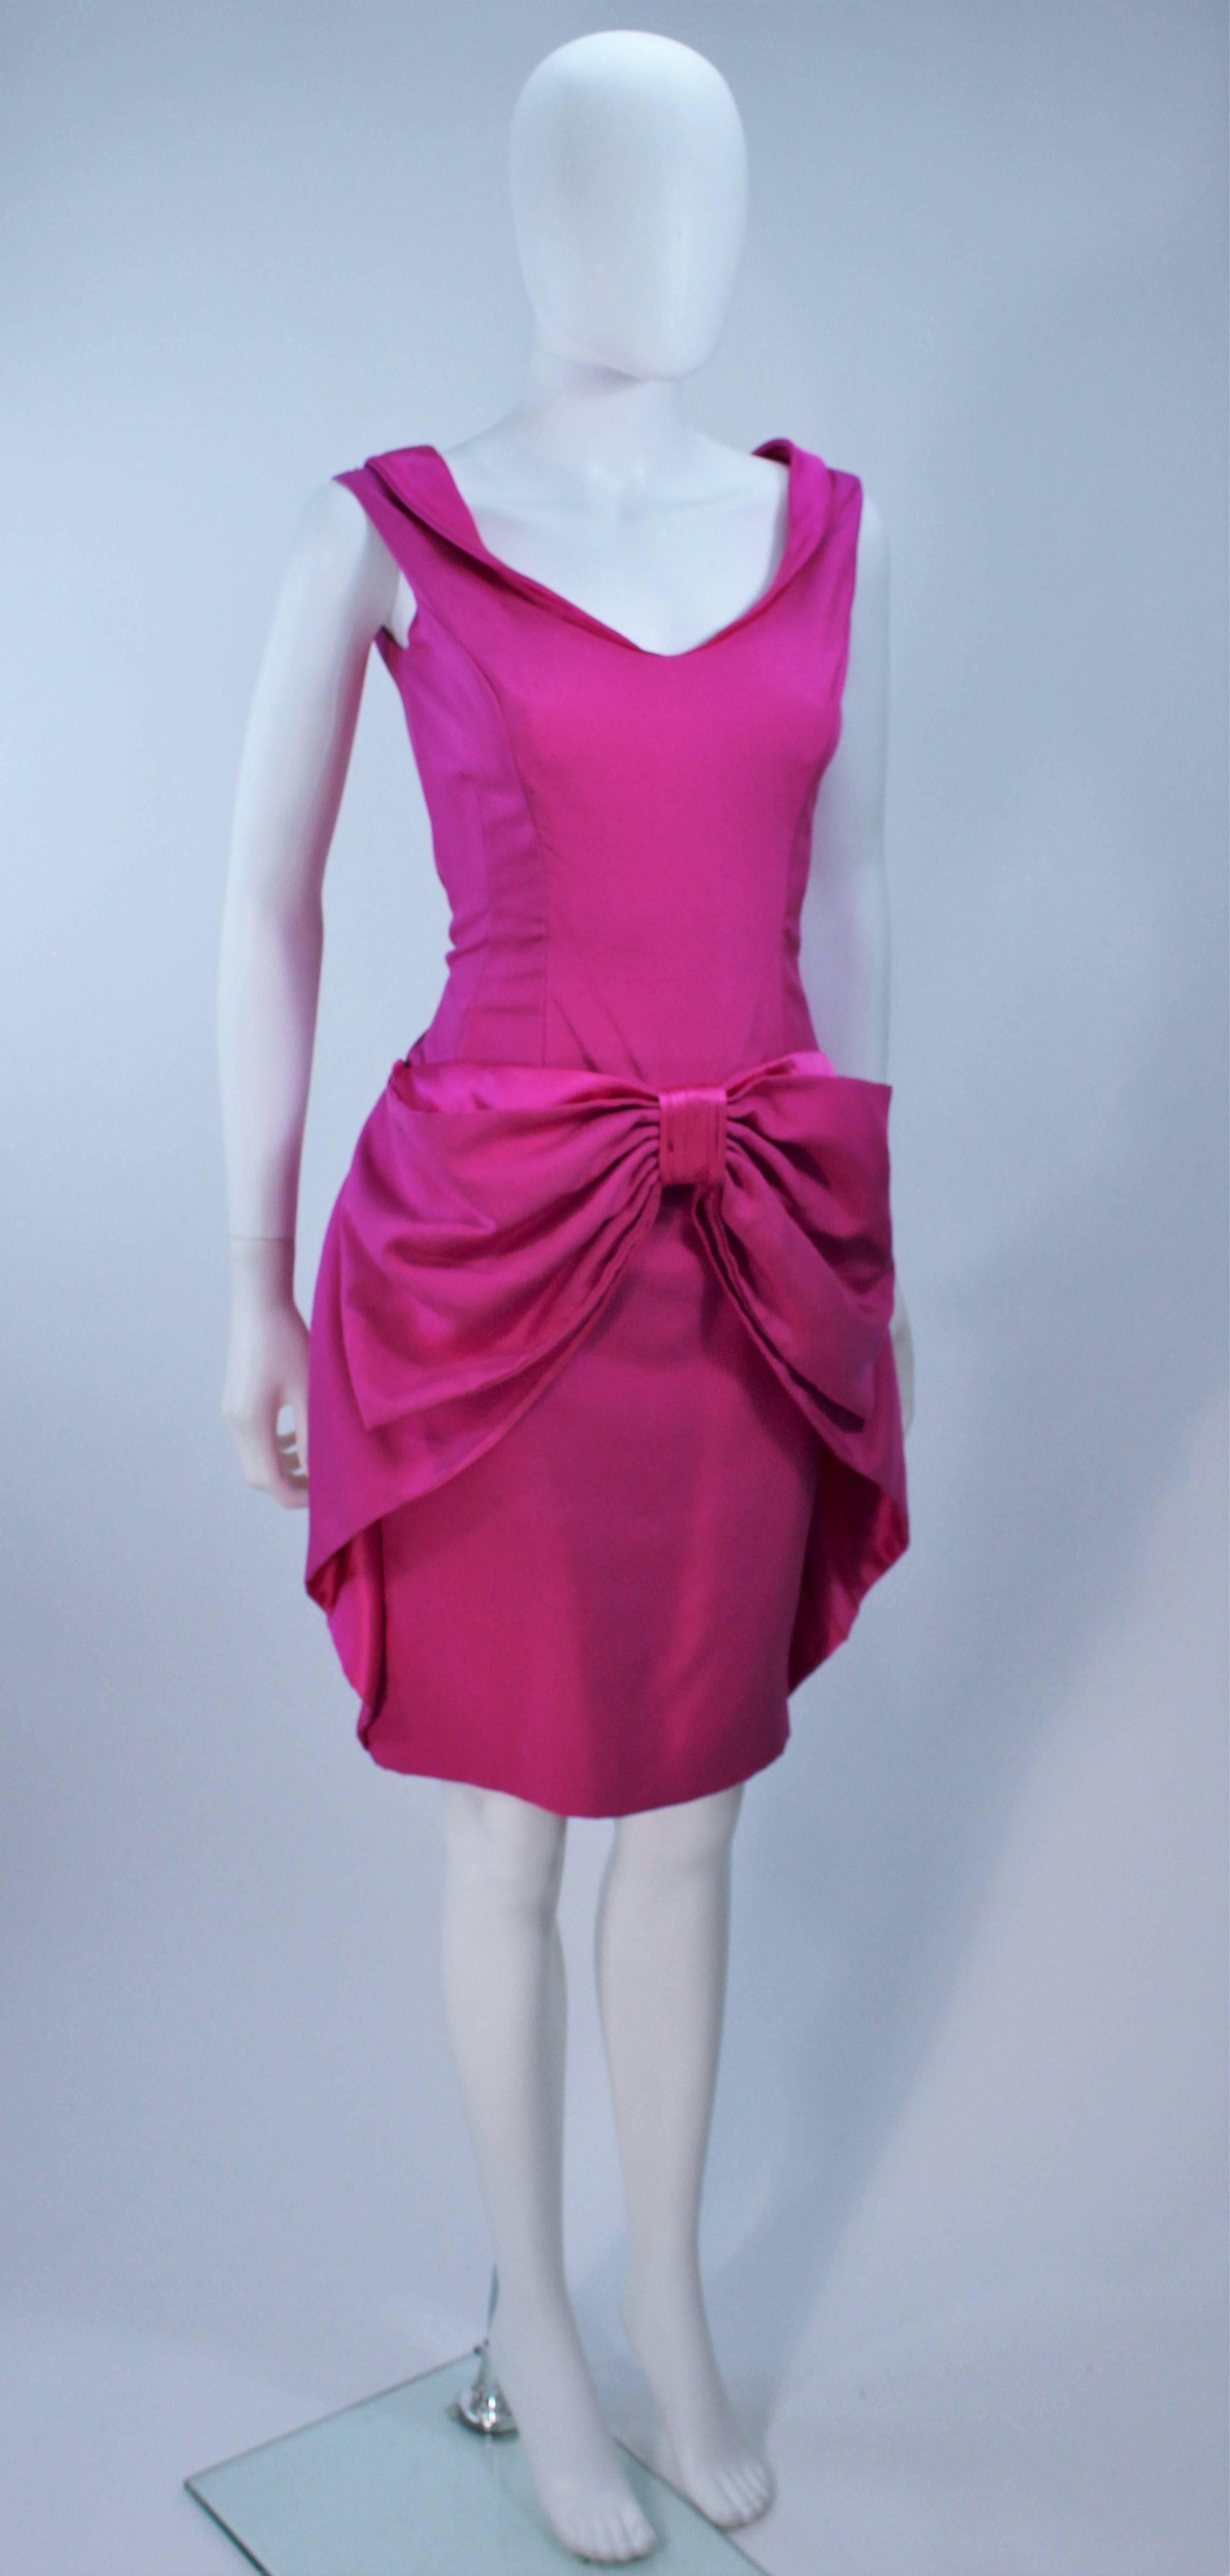 Women's ELIZABETH MASON COUTURE Pink Magenta Bow Cocktail Dress Made to Order For Sale